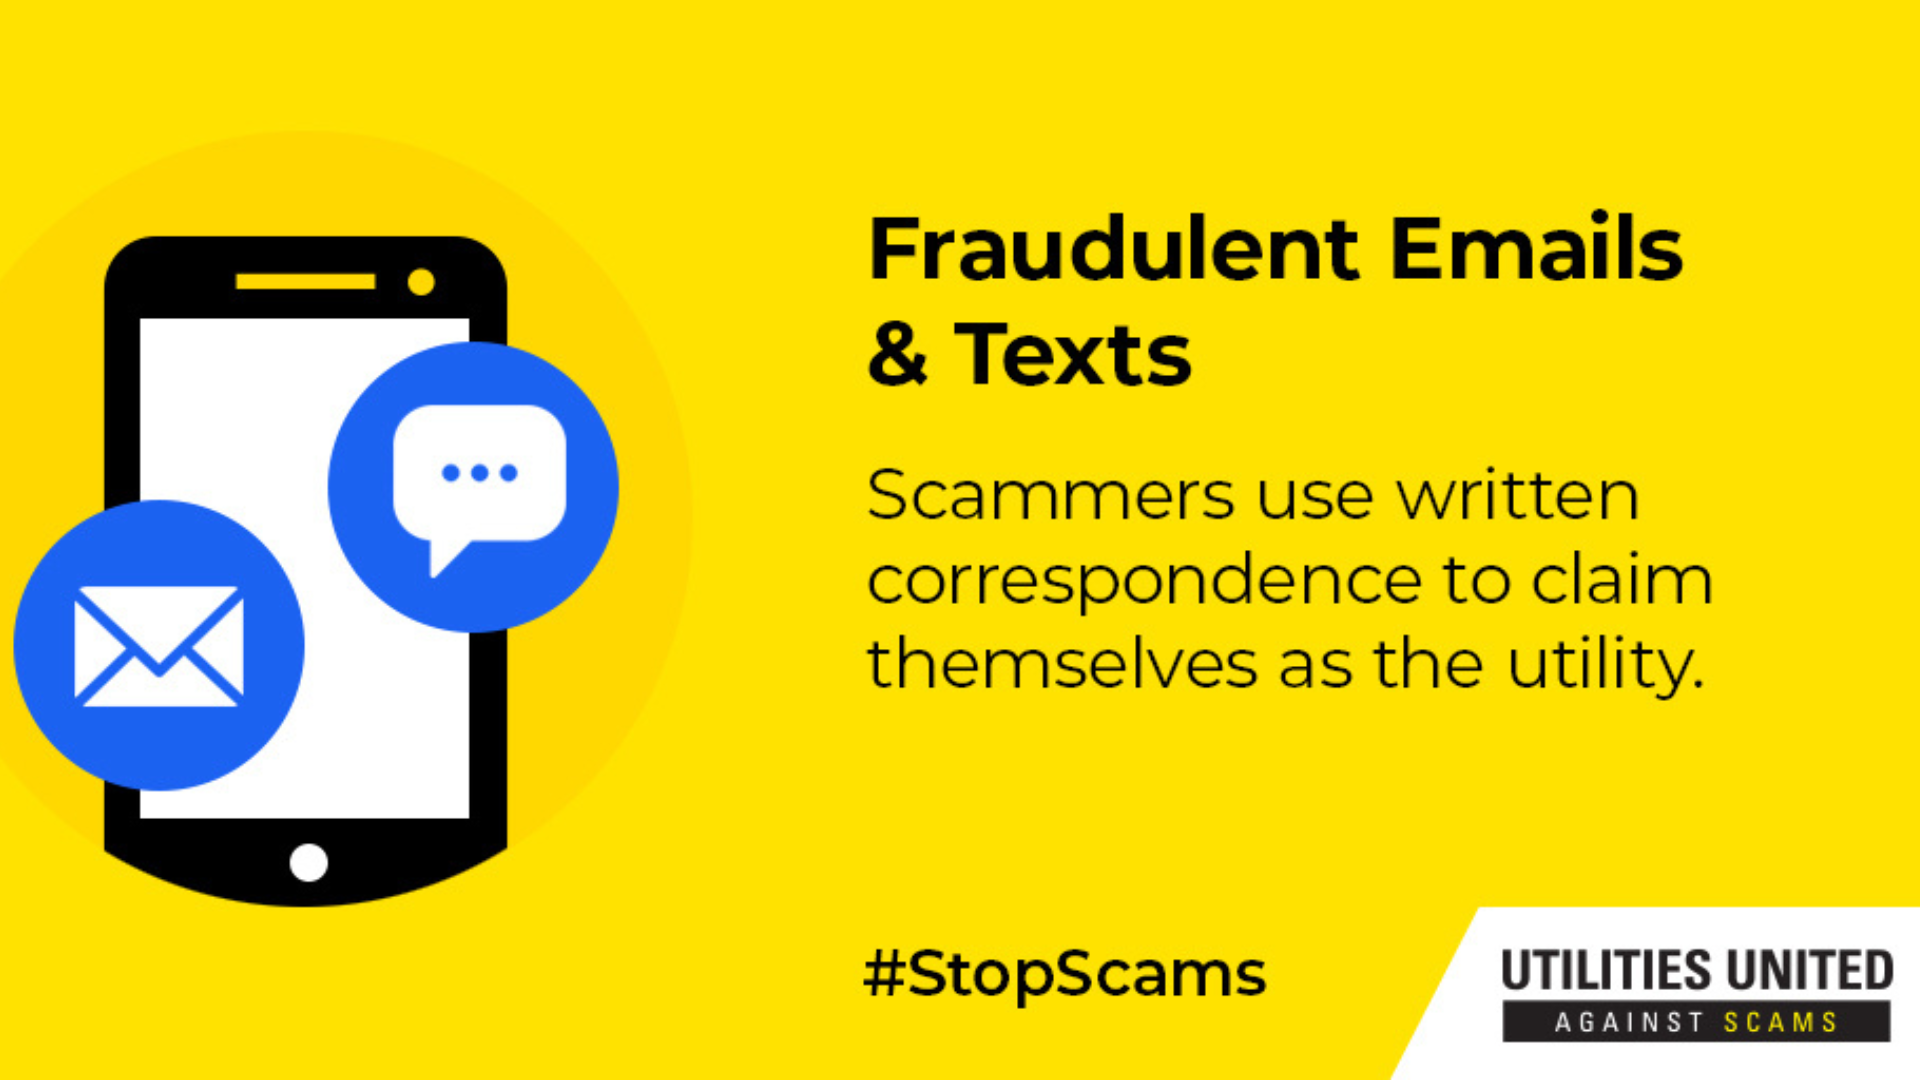 Don't fall for fraudulent emails and texts by scammers